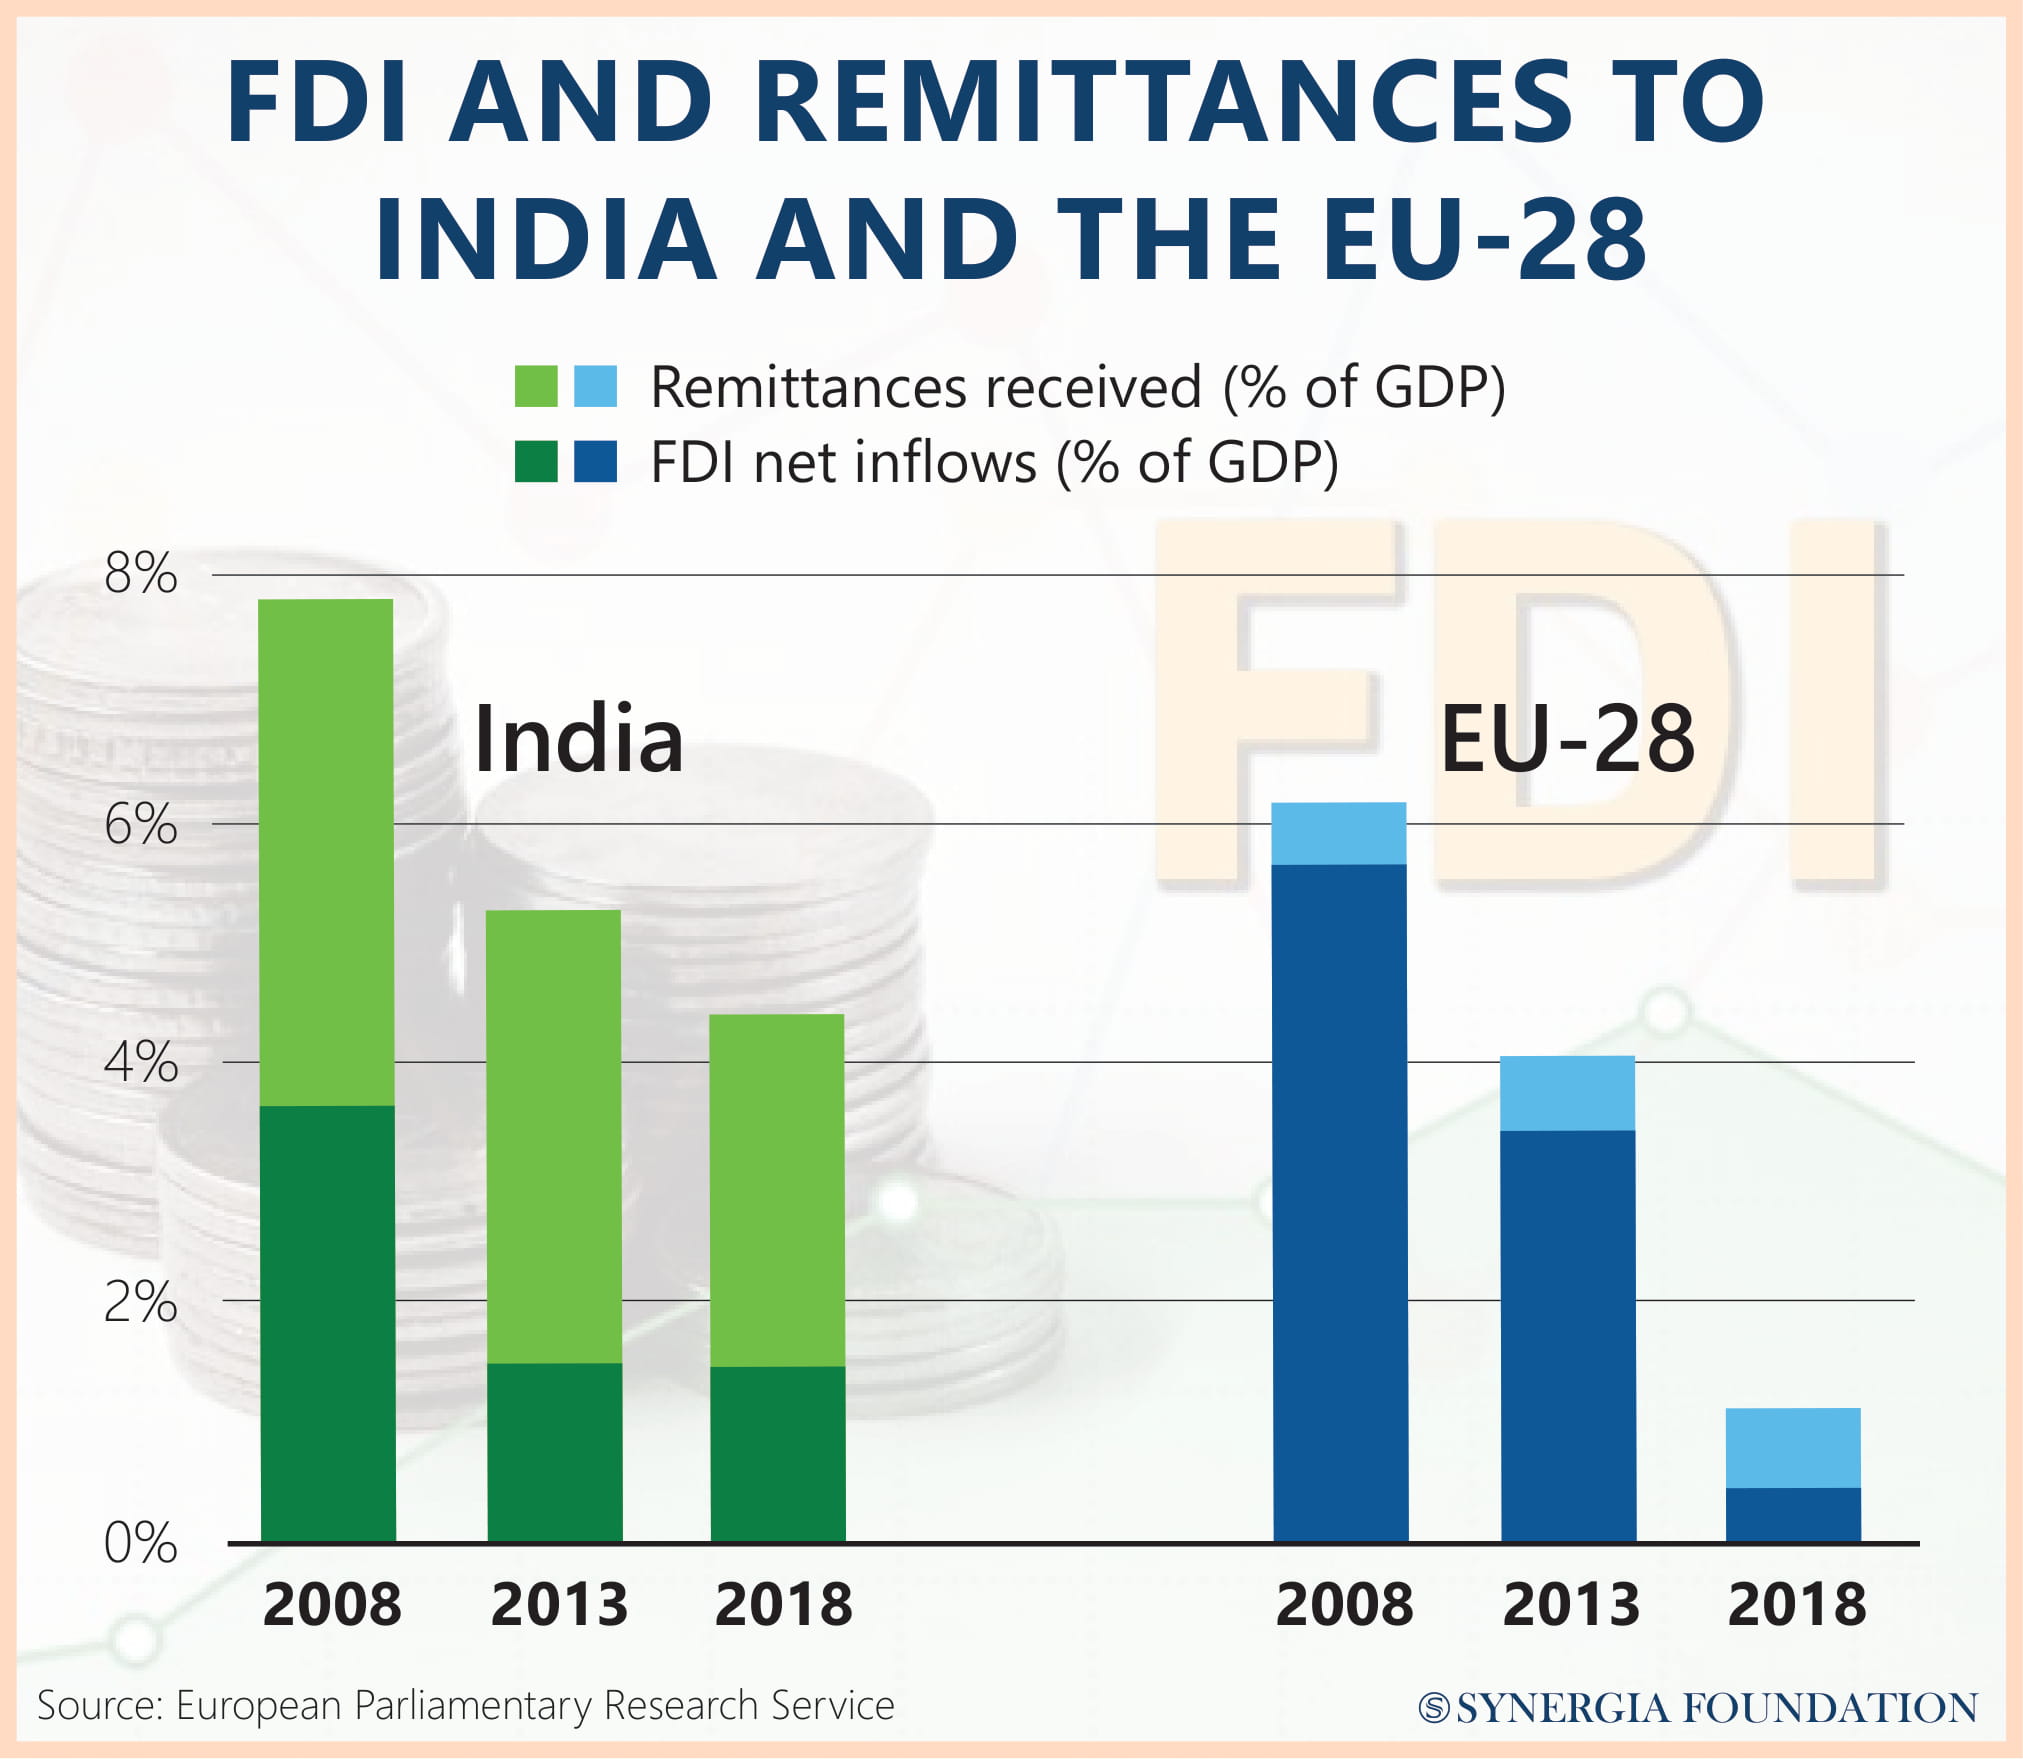 FDI and Remittances to India and the EU-28